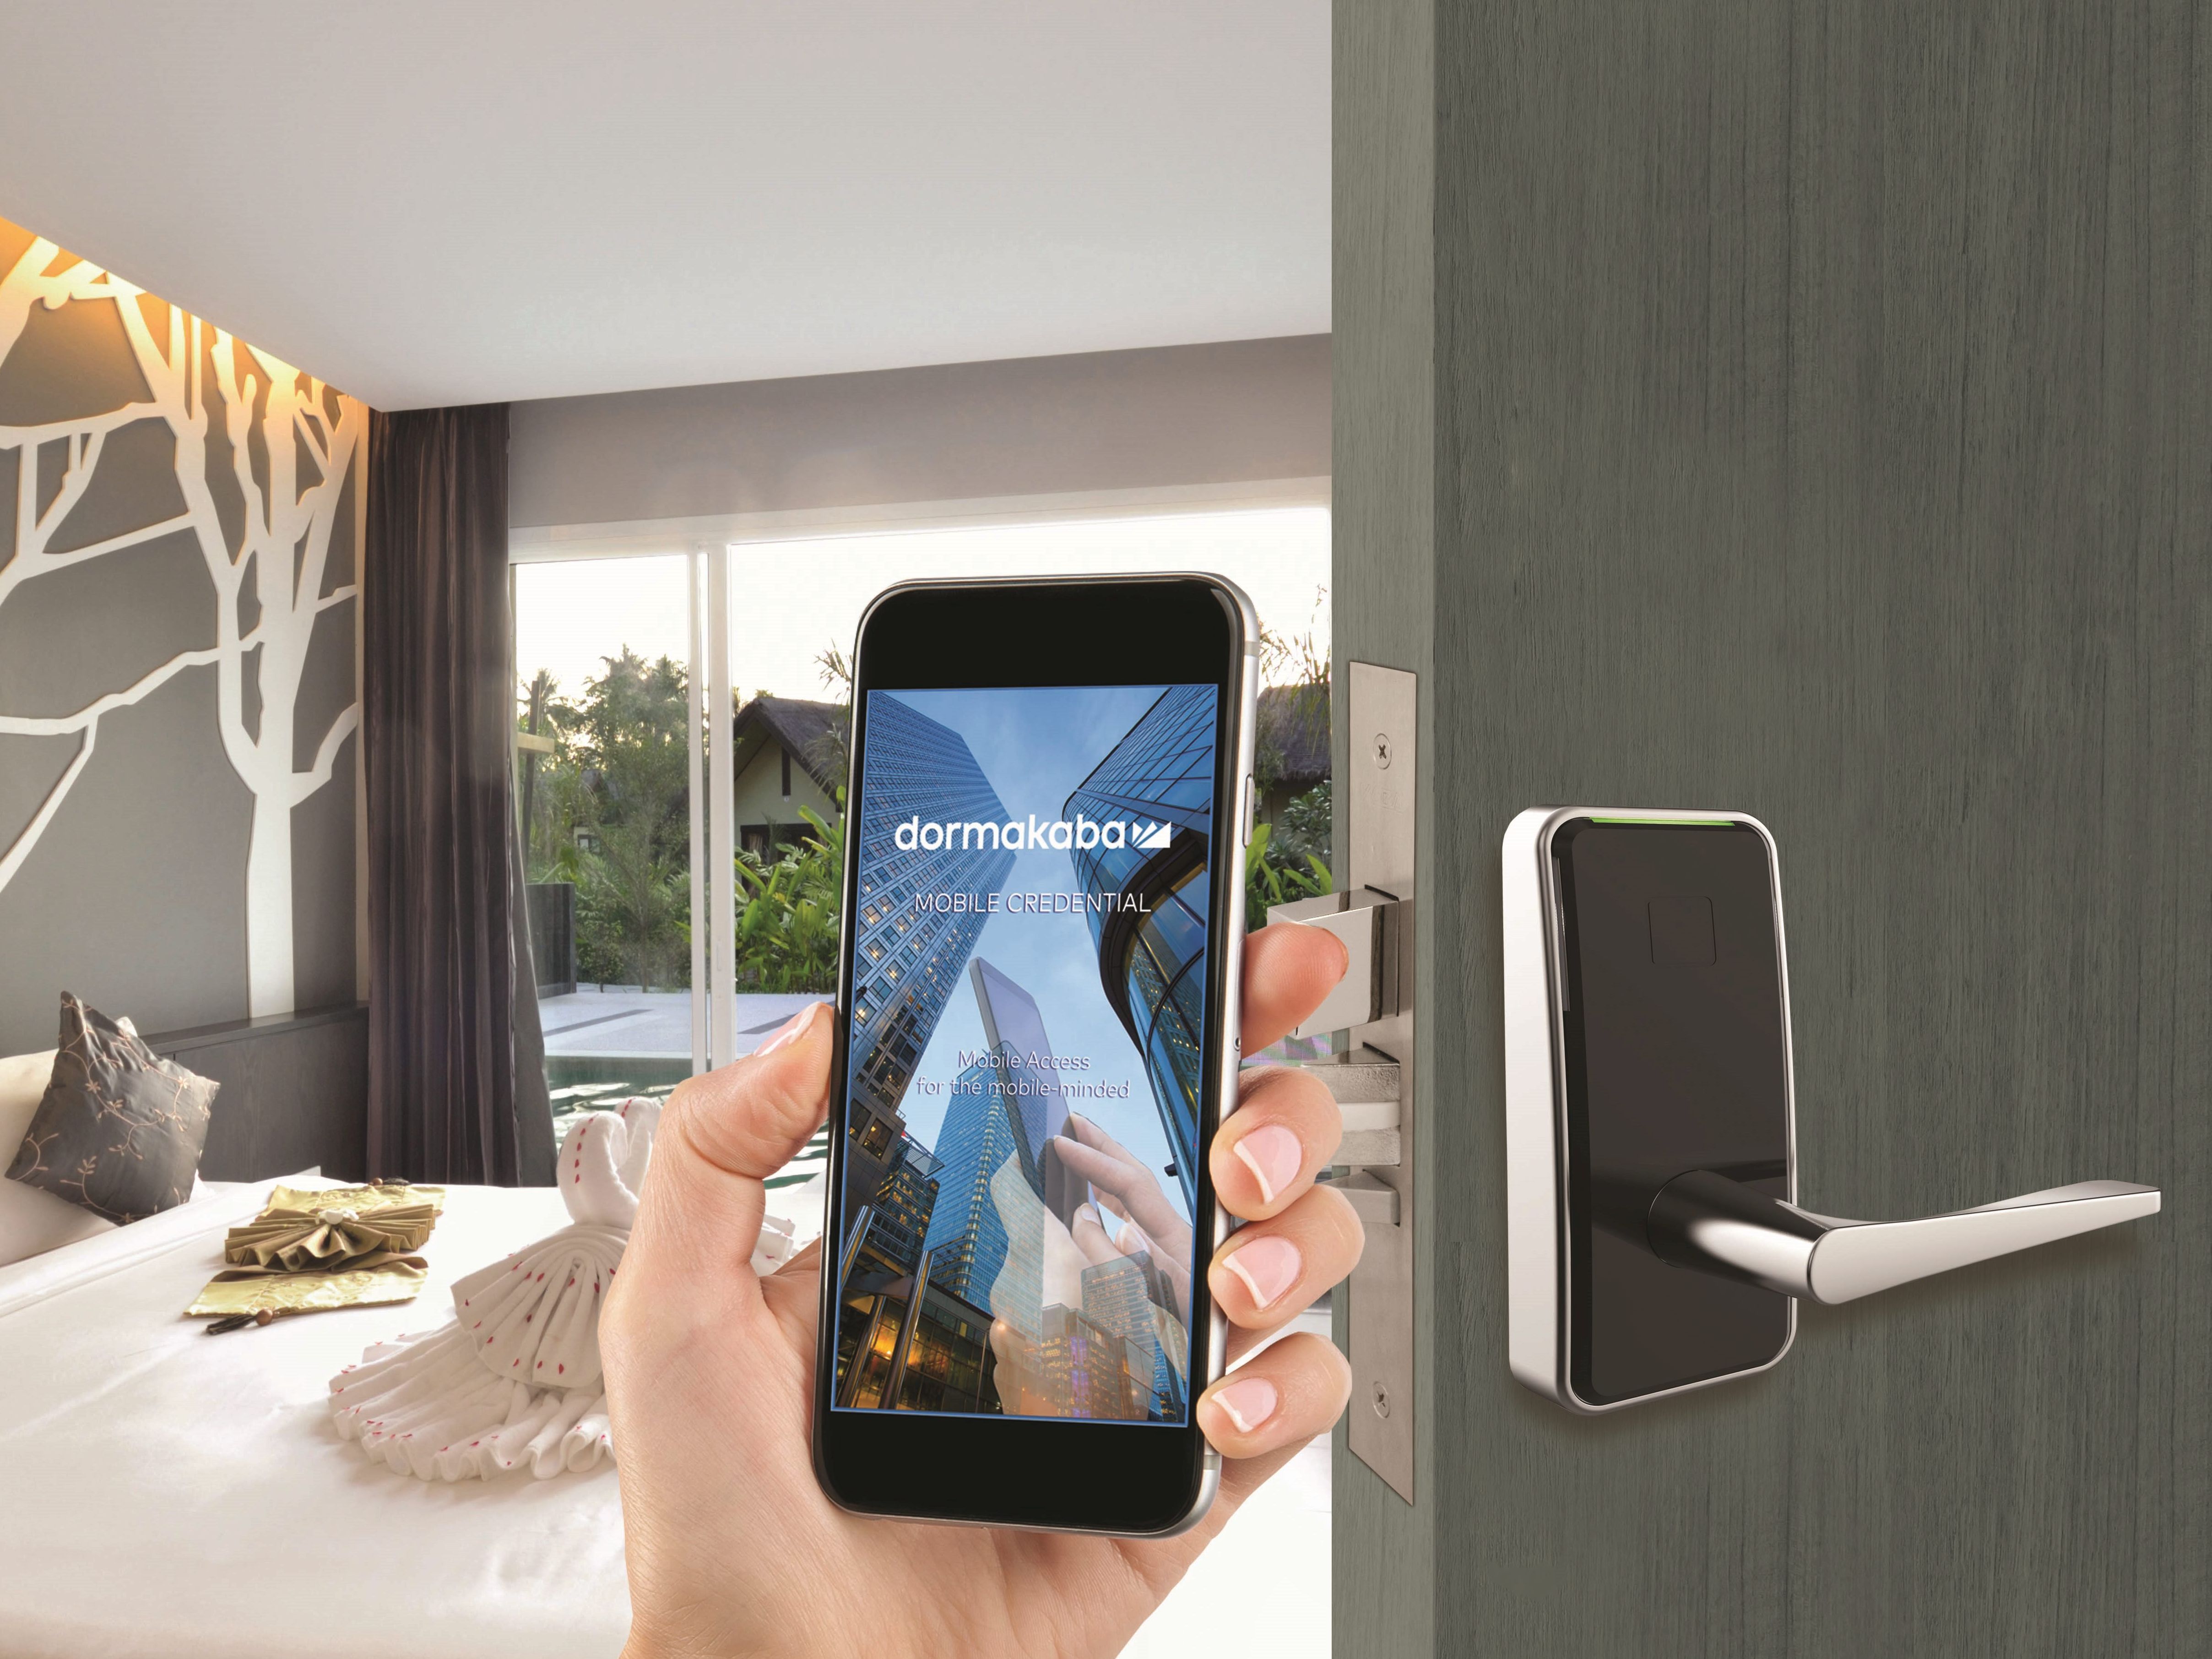 Why mobile key is taking over in hotels